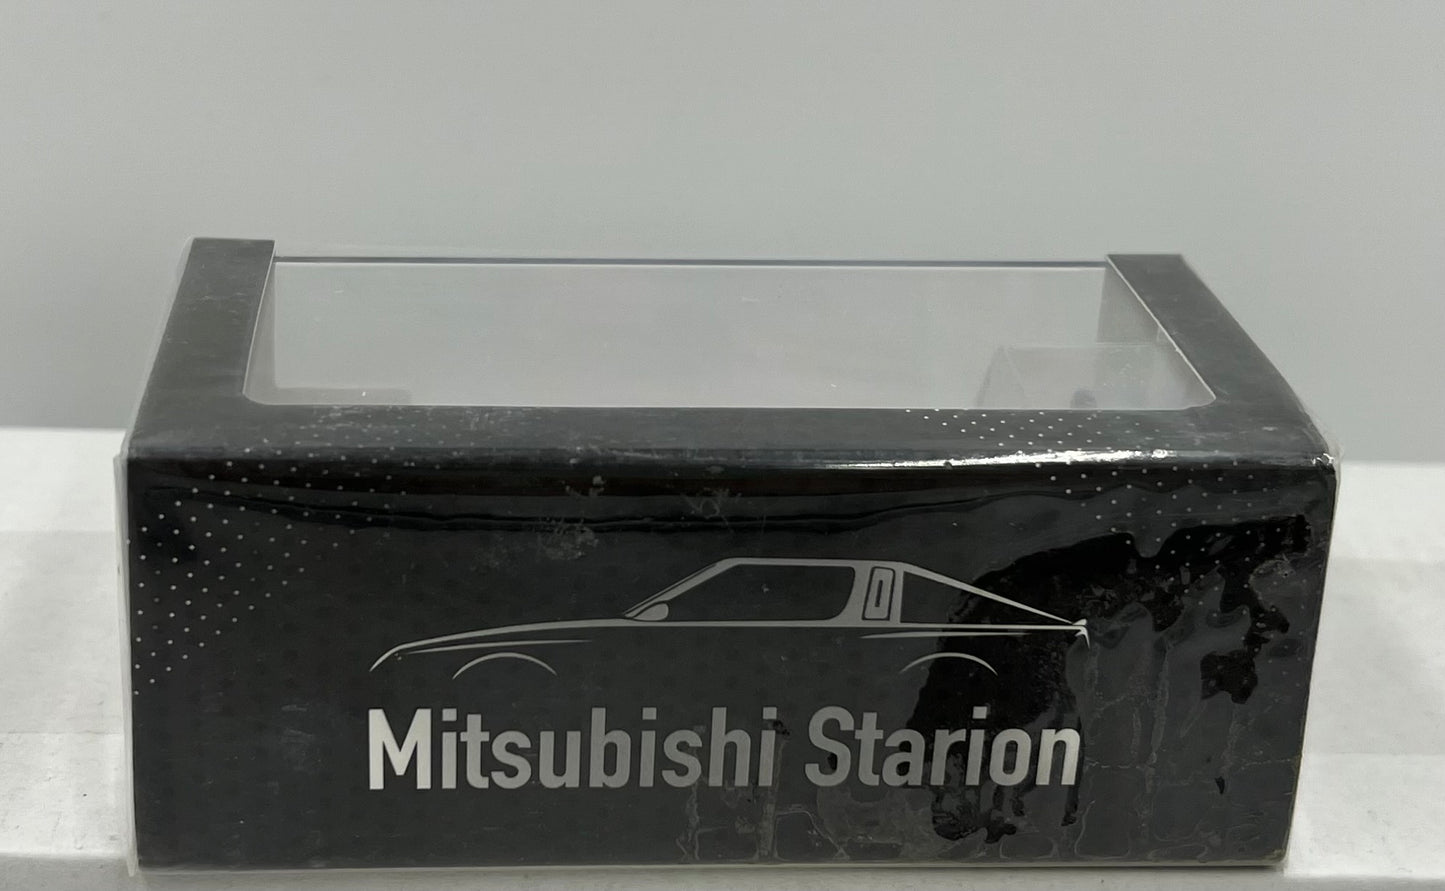 1:64 Mitsubishi Starion Red with Figure Pop Race